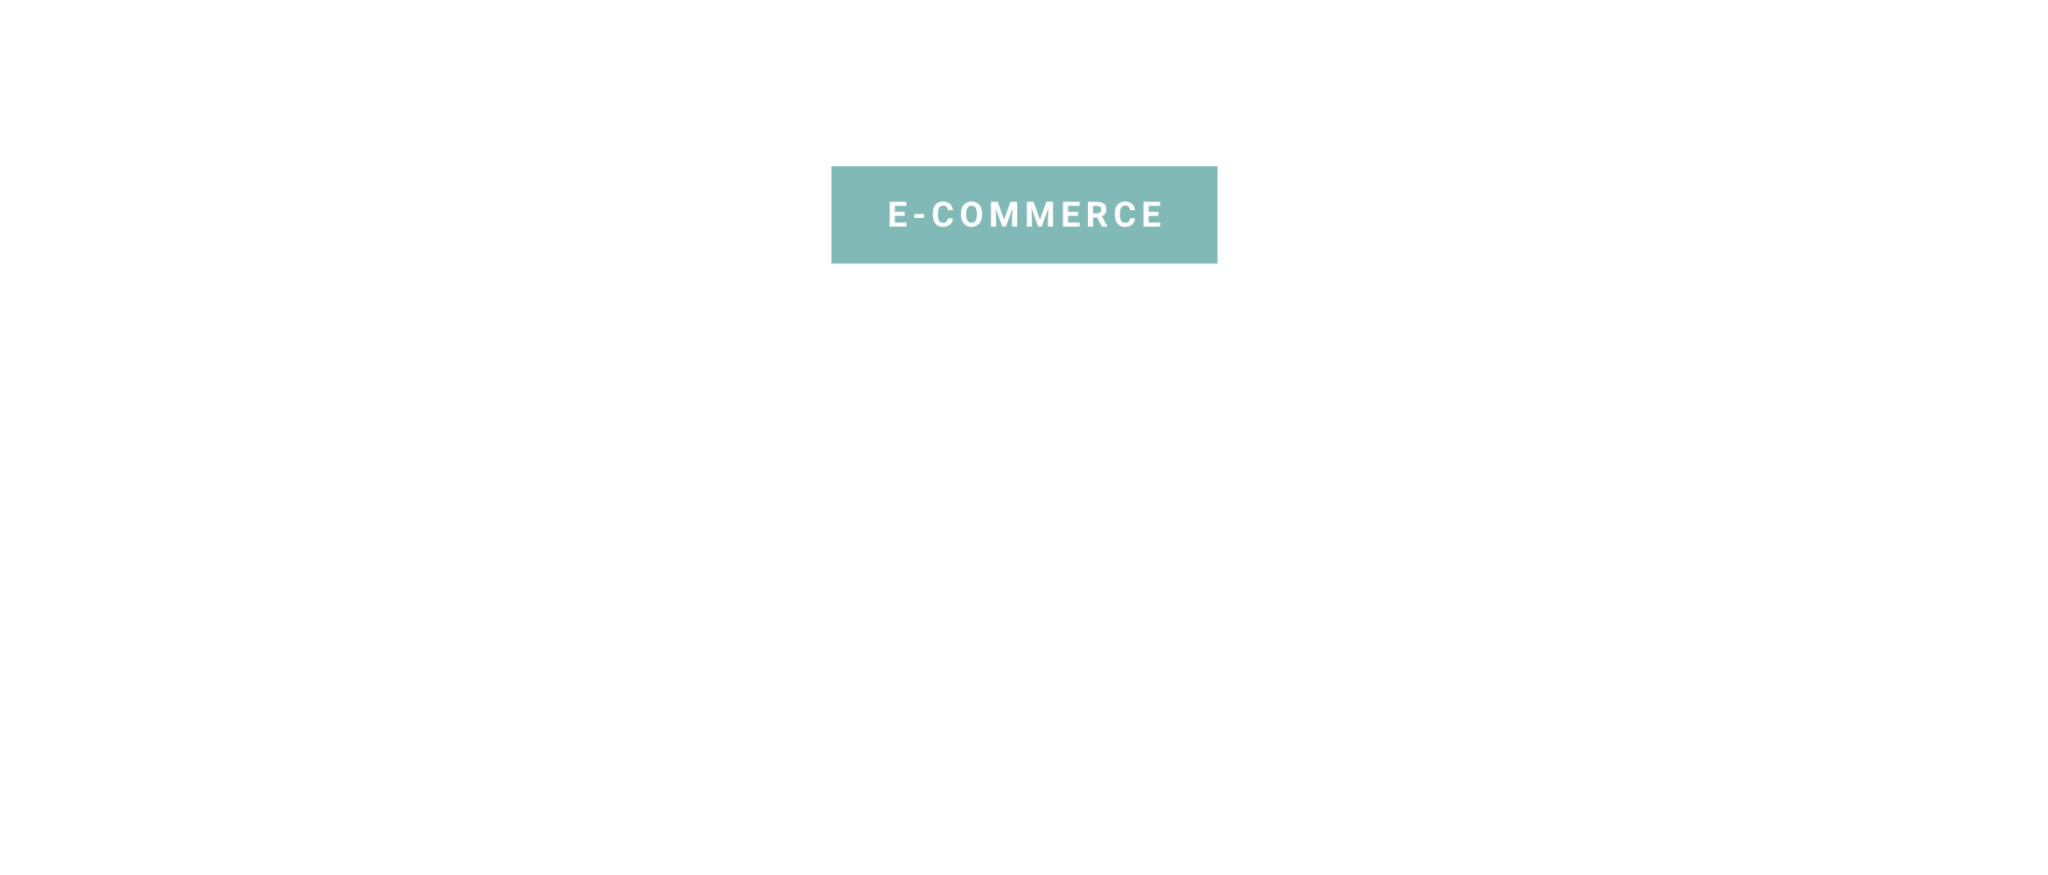 E-commerce: Elevating the Everyday